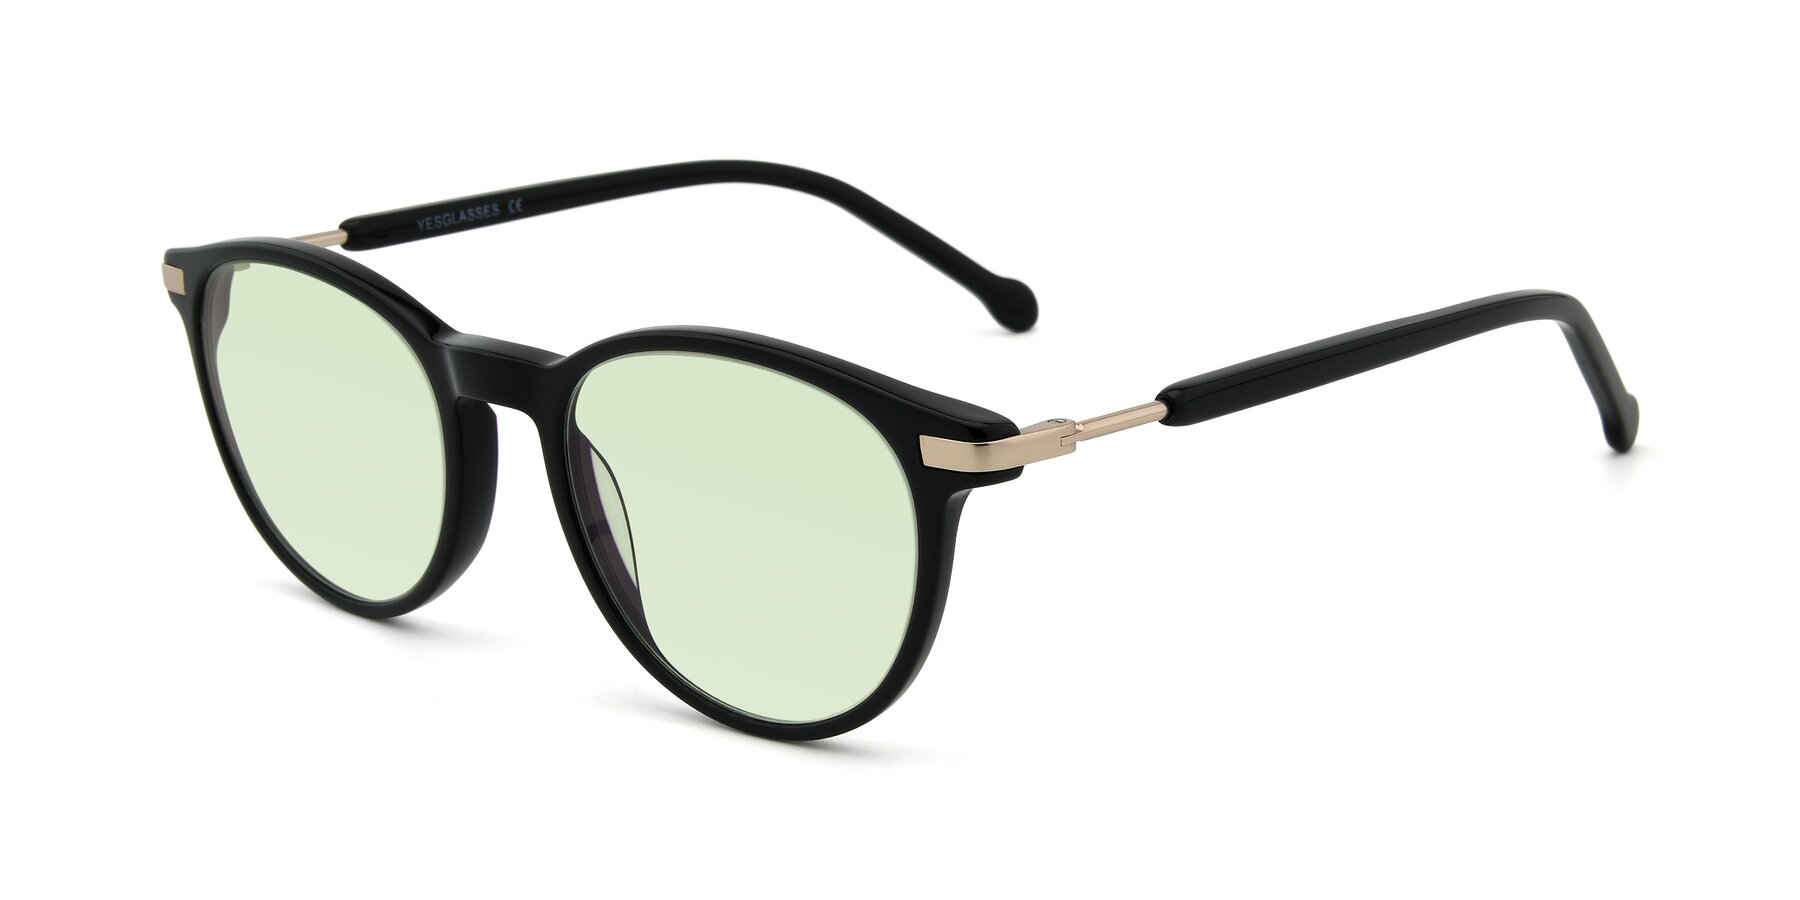 Angle of 17429 in Black with Light Green Tinted Lenses